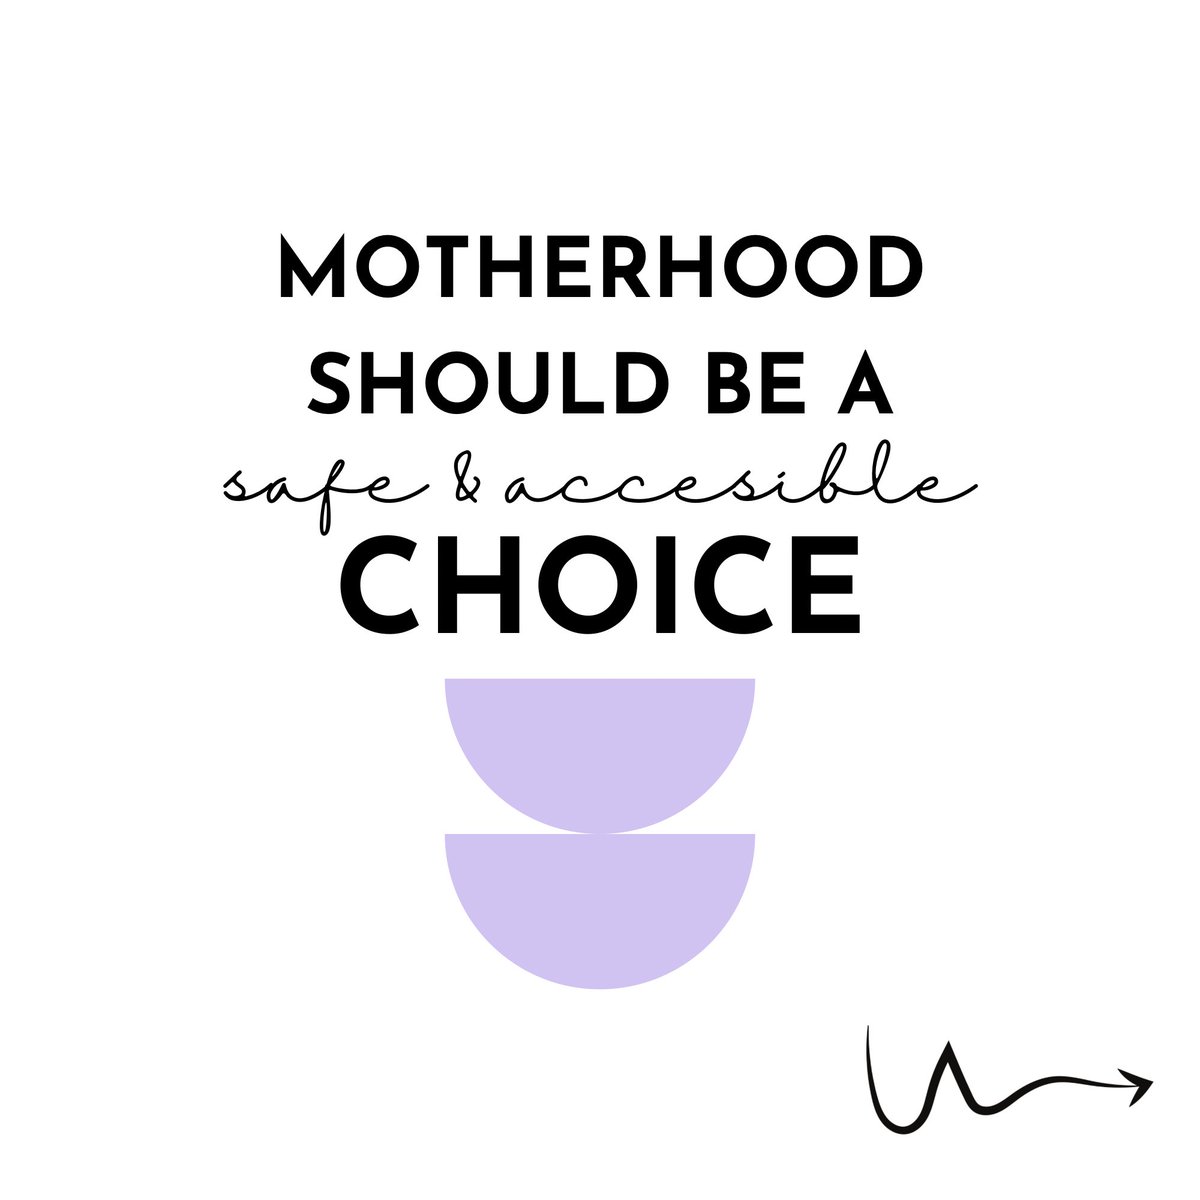 Today is Mother’s Day! When you think of who gets an abortion, who do you picture?It may surprise some people to learn that most people who seek abortion already have kids. 59% of people who get an abortion in the U.S. have already given birth at least once. 